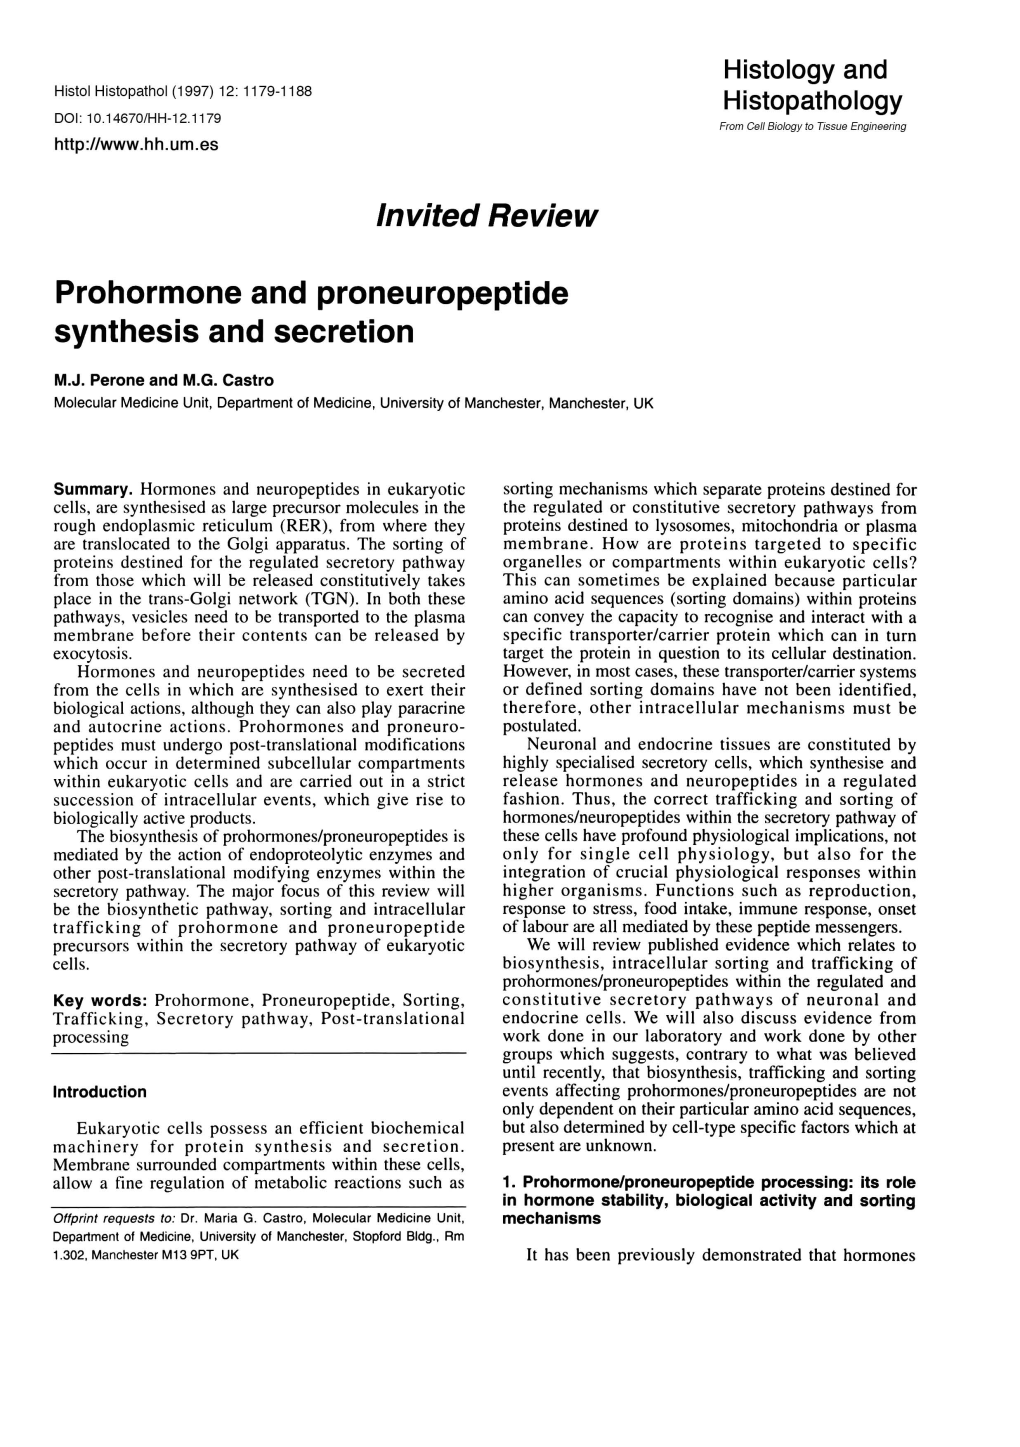 Invited Review Prohormone and Proneuropeptide Synthesis and Secretion